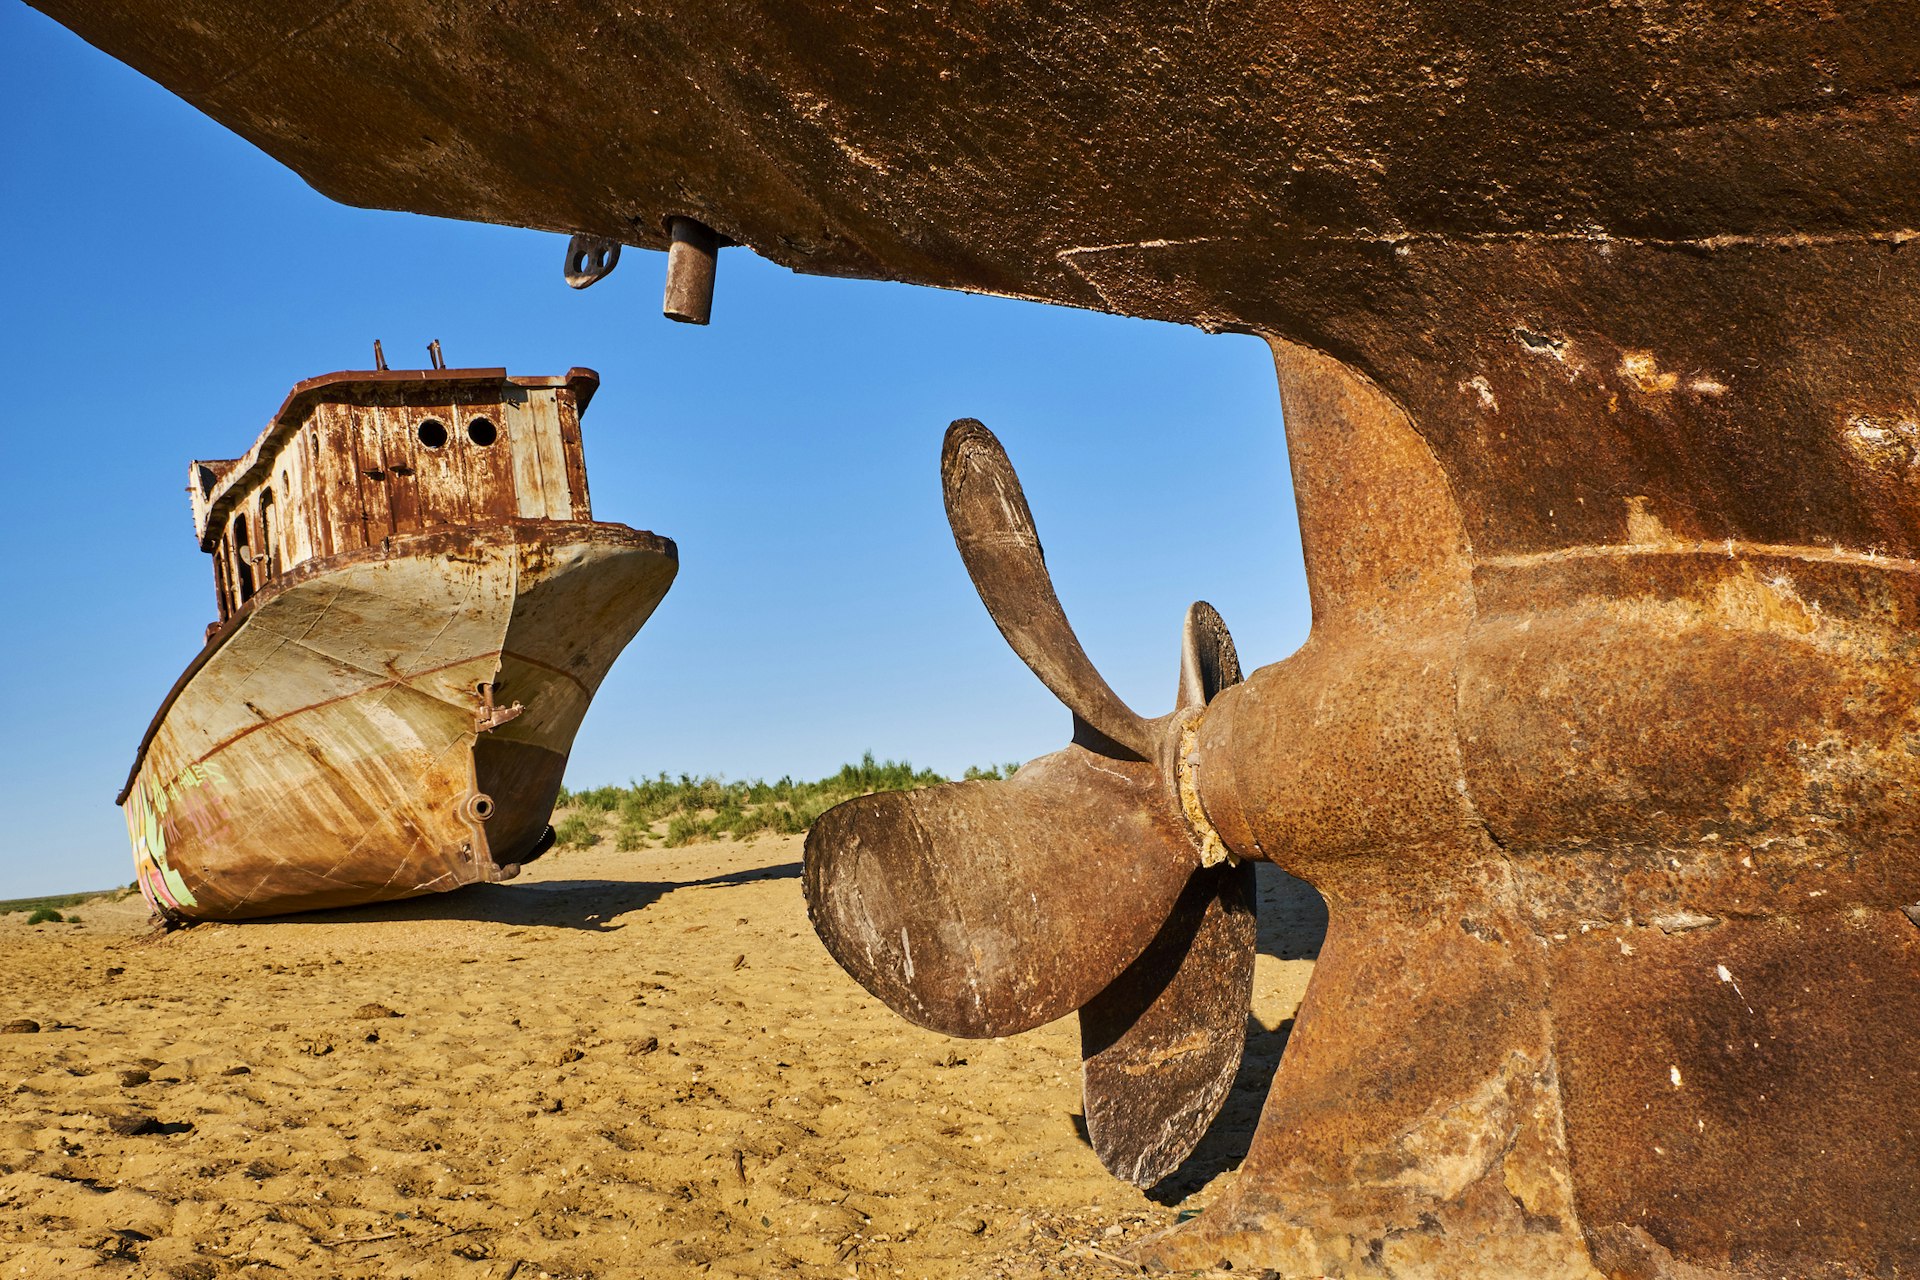 Rusting hulls of two ships on dry land